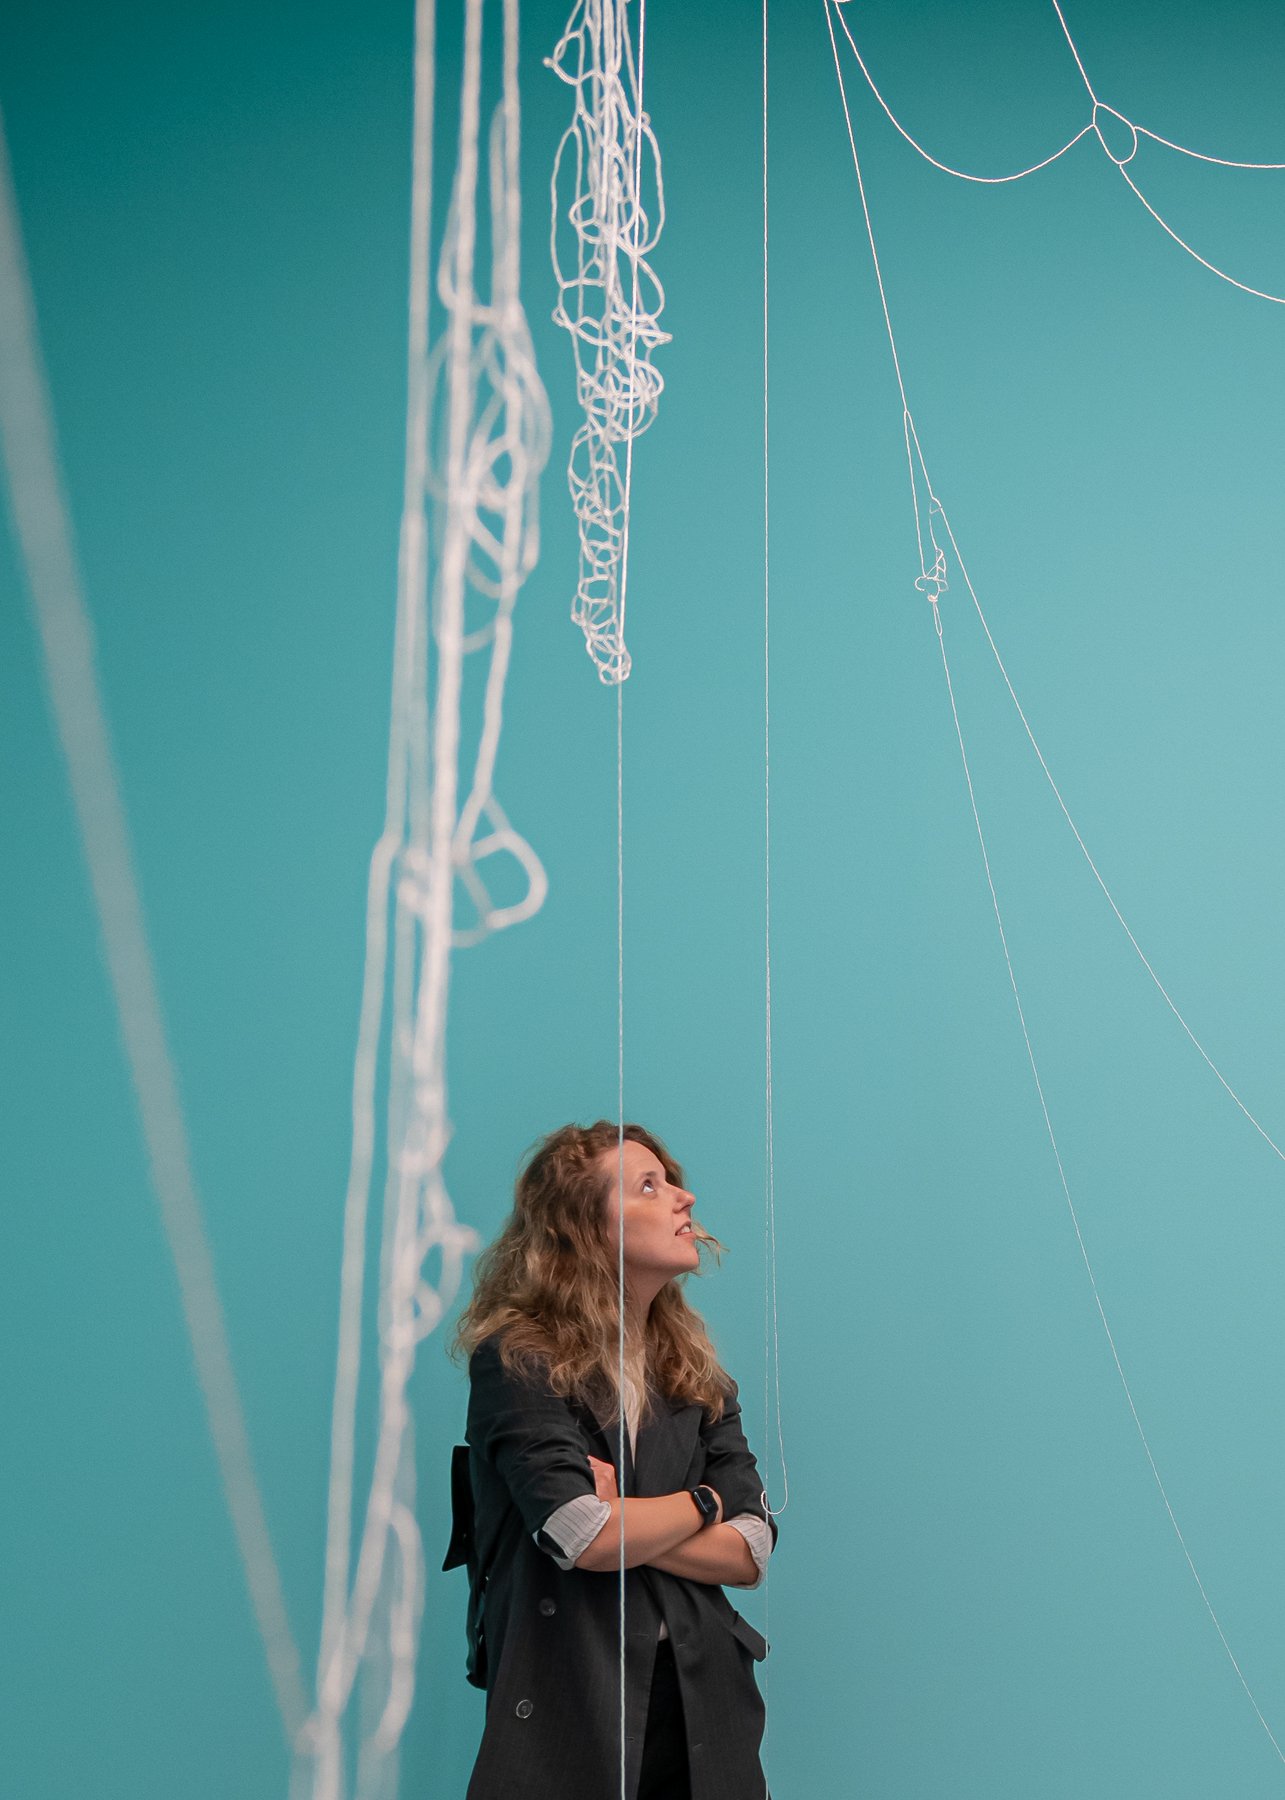  Making Waves   Installation with ‘Atoms of Delight’ (glass beads and nylon thread), ‘Small Fires’(nails and magnets) and wall paint  at Bündner Kunstmuseum, Chur Fotocredit: Yanik Bürkli, on the picture: Anna Konstantinova   